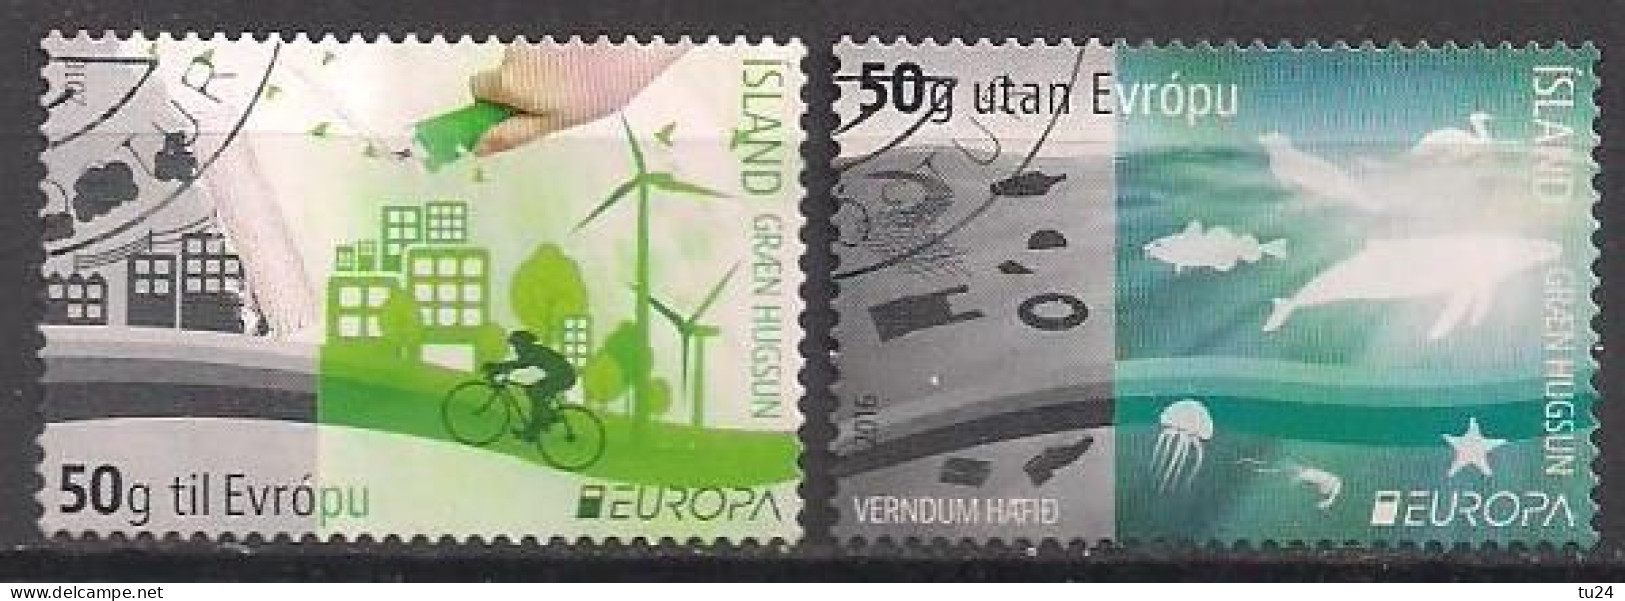 Island  (2016)  Mi.Nr.  1495 + 1496  Gest. / Used  (4he06)  EUROPA / MH / From Booklet - Gebraucht